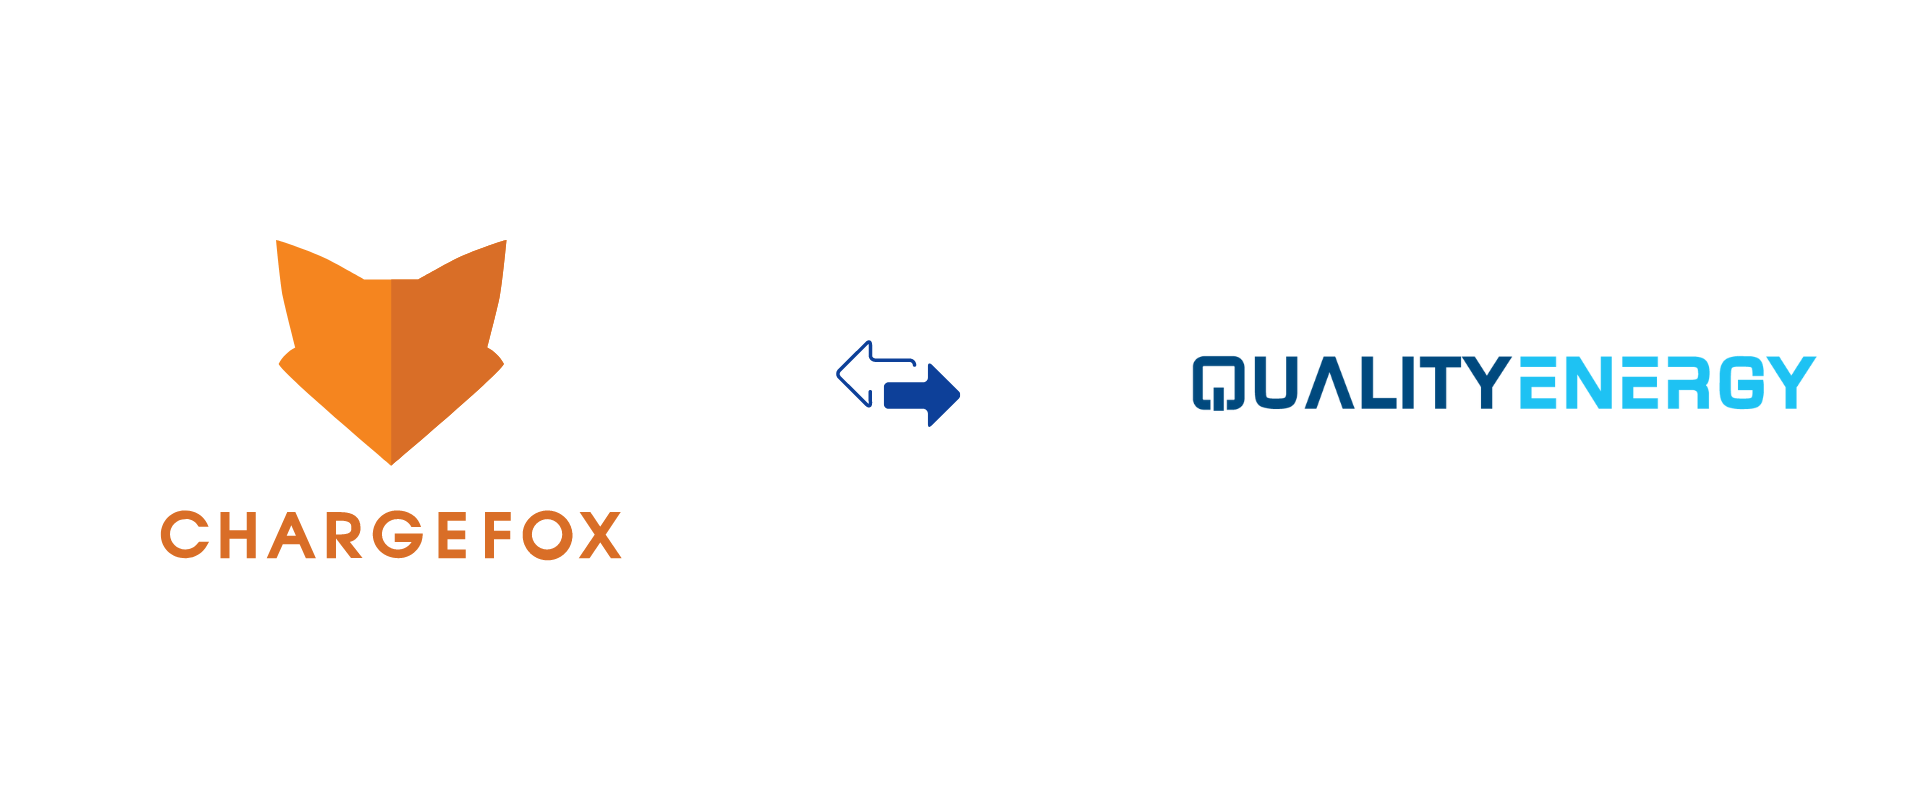 Chargefox and Quality Energy logo